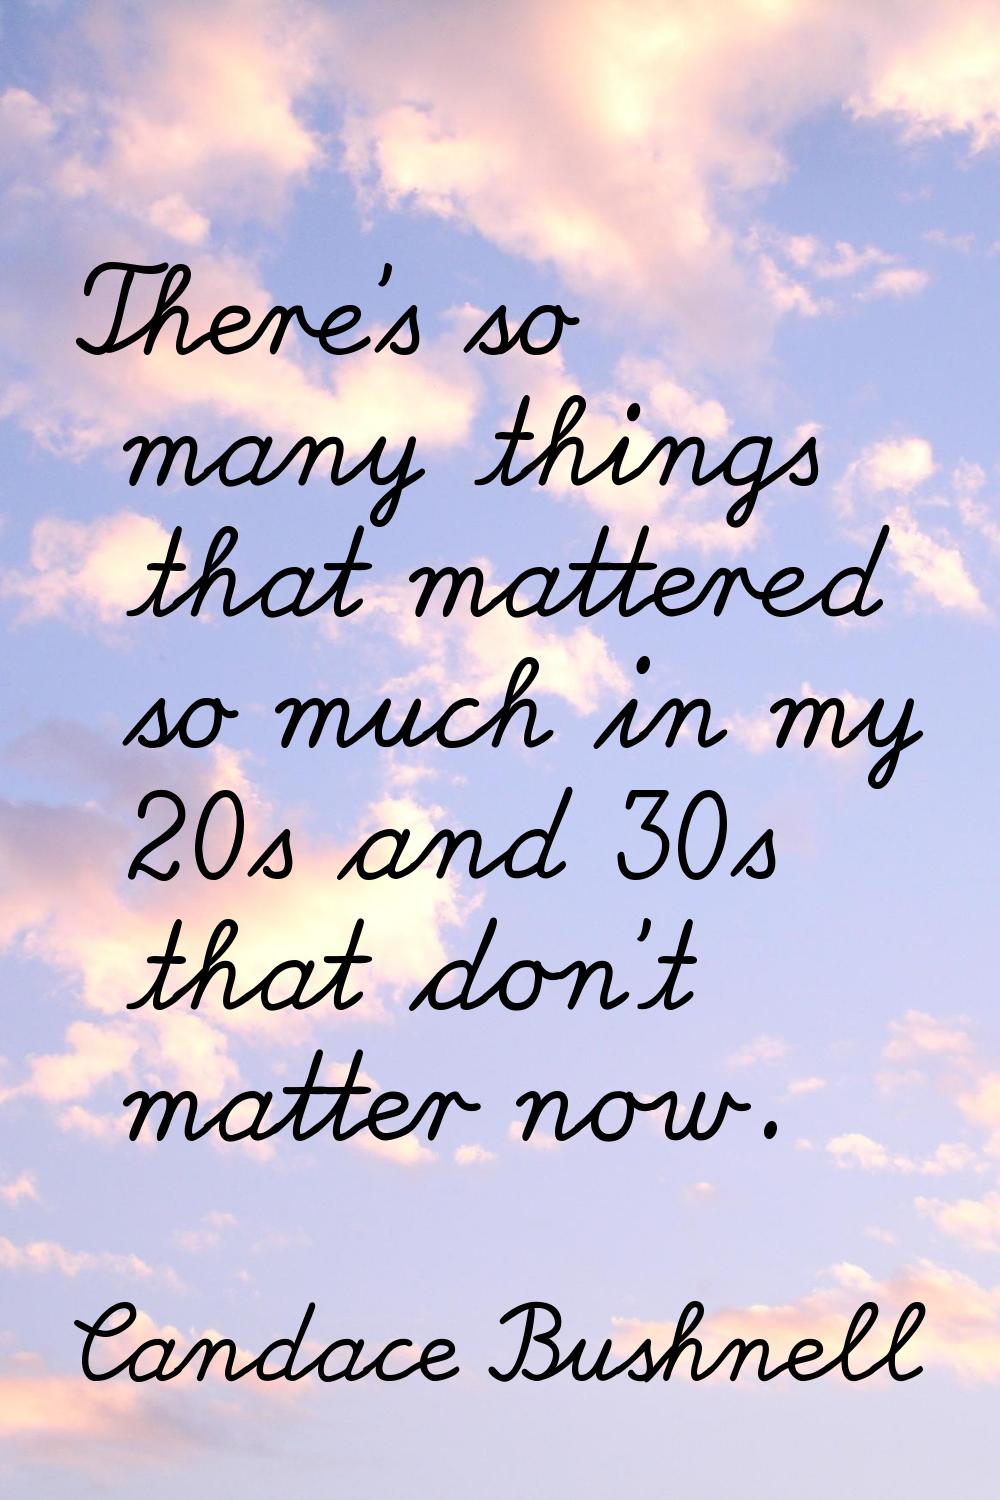 There's so many things that mattered so much in my 20s and 30s that don't matter now.